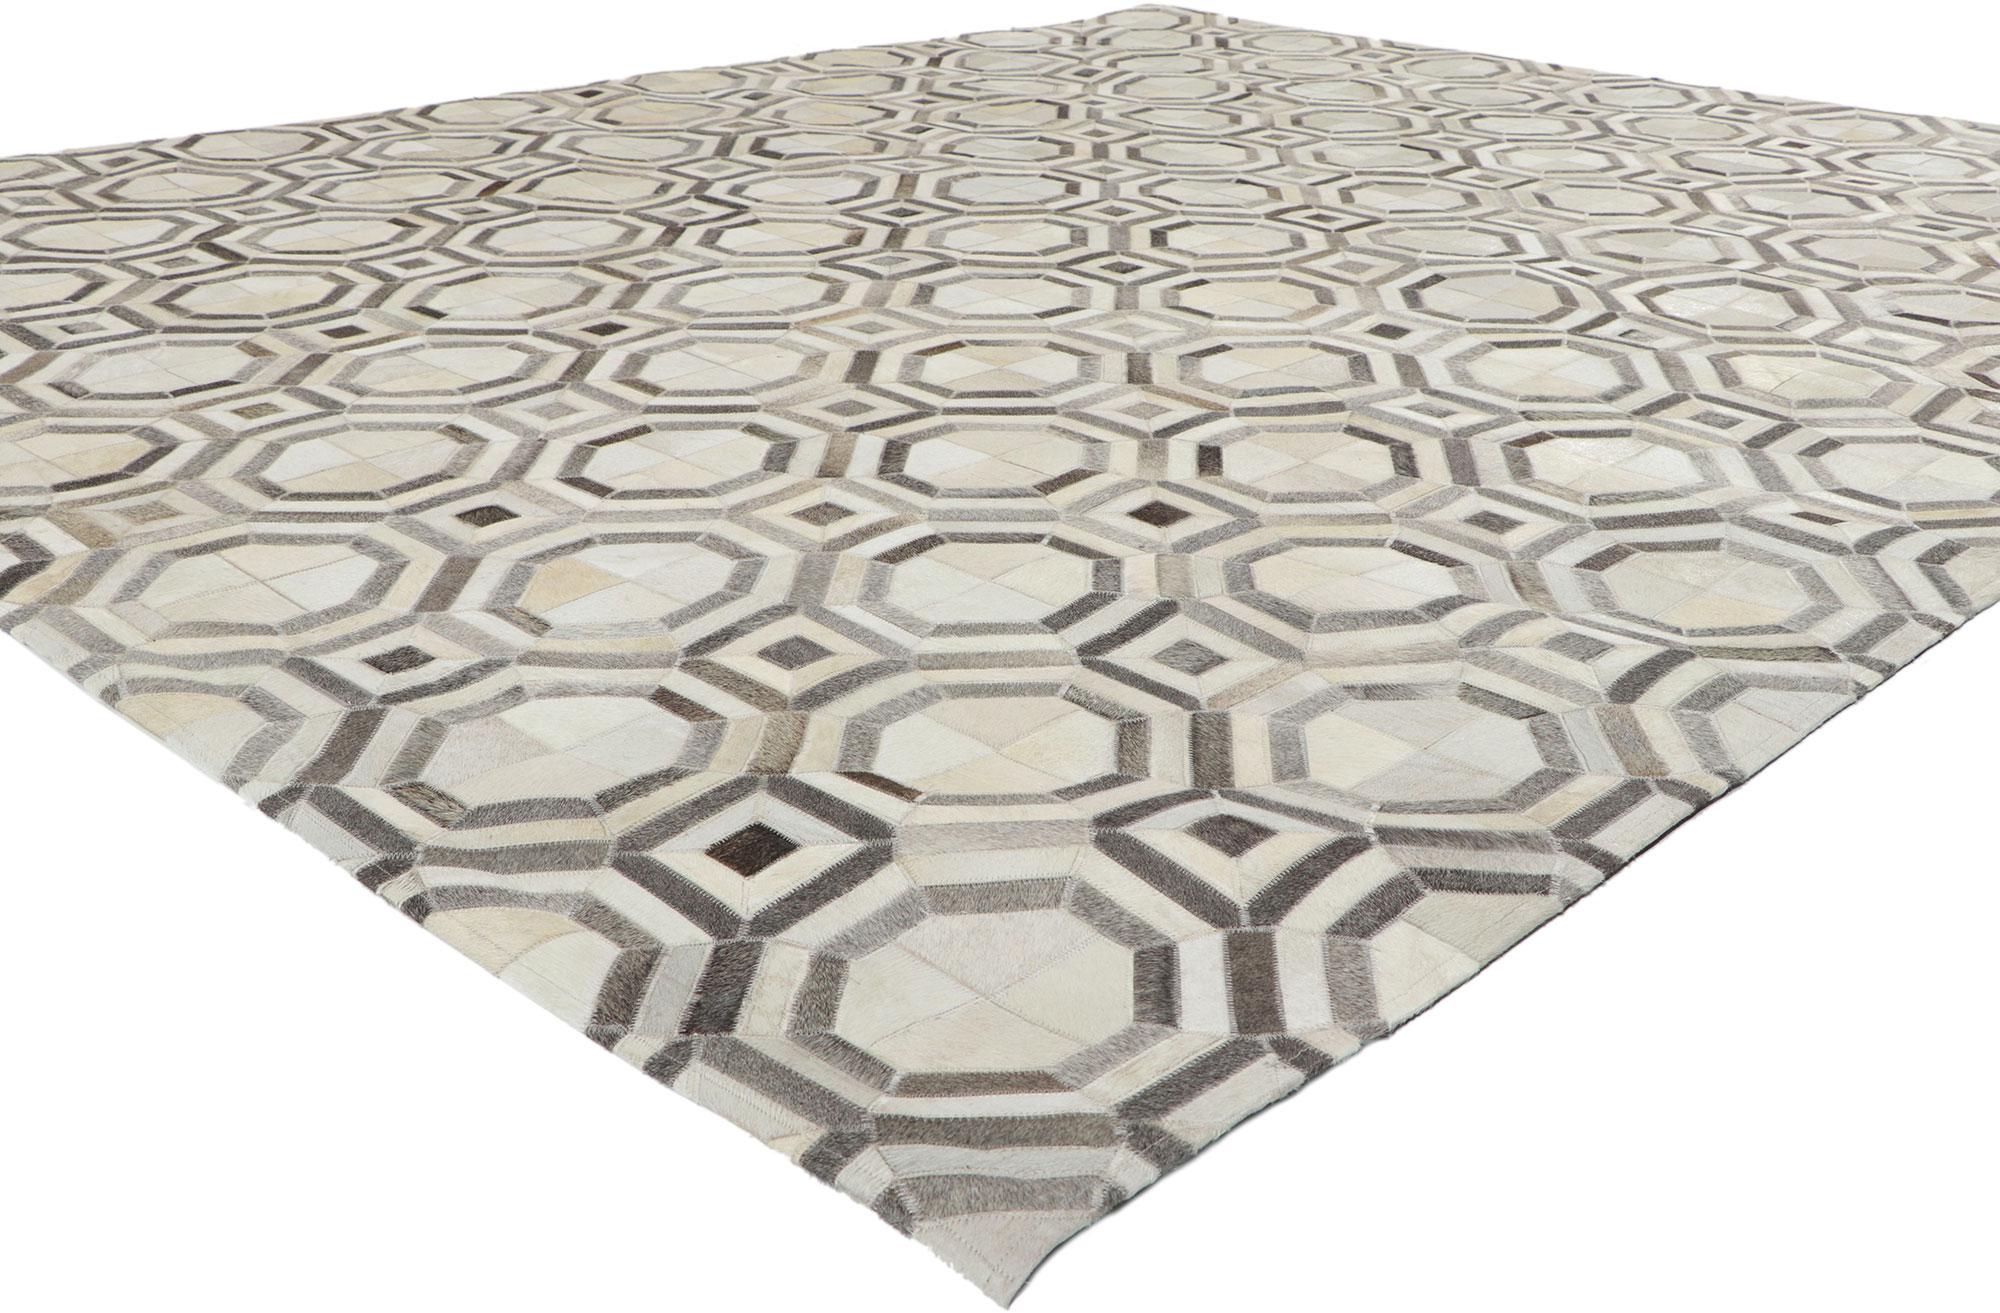 30912 Contemporary Patchwork Cowhide Rug with Modern Style, 08'00 x 09'11. Call the wild indoors and bring a sense of adventure home with this handcrafted cowhide rug. Showcasing a modern design, incredible detail and texture, this leather cowhide